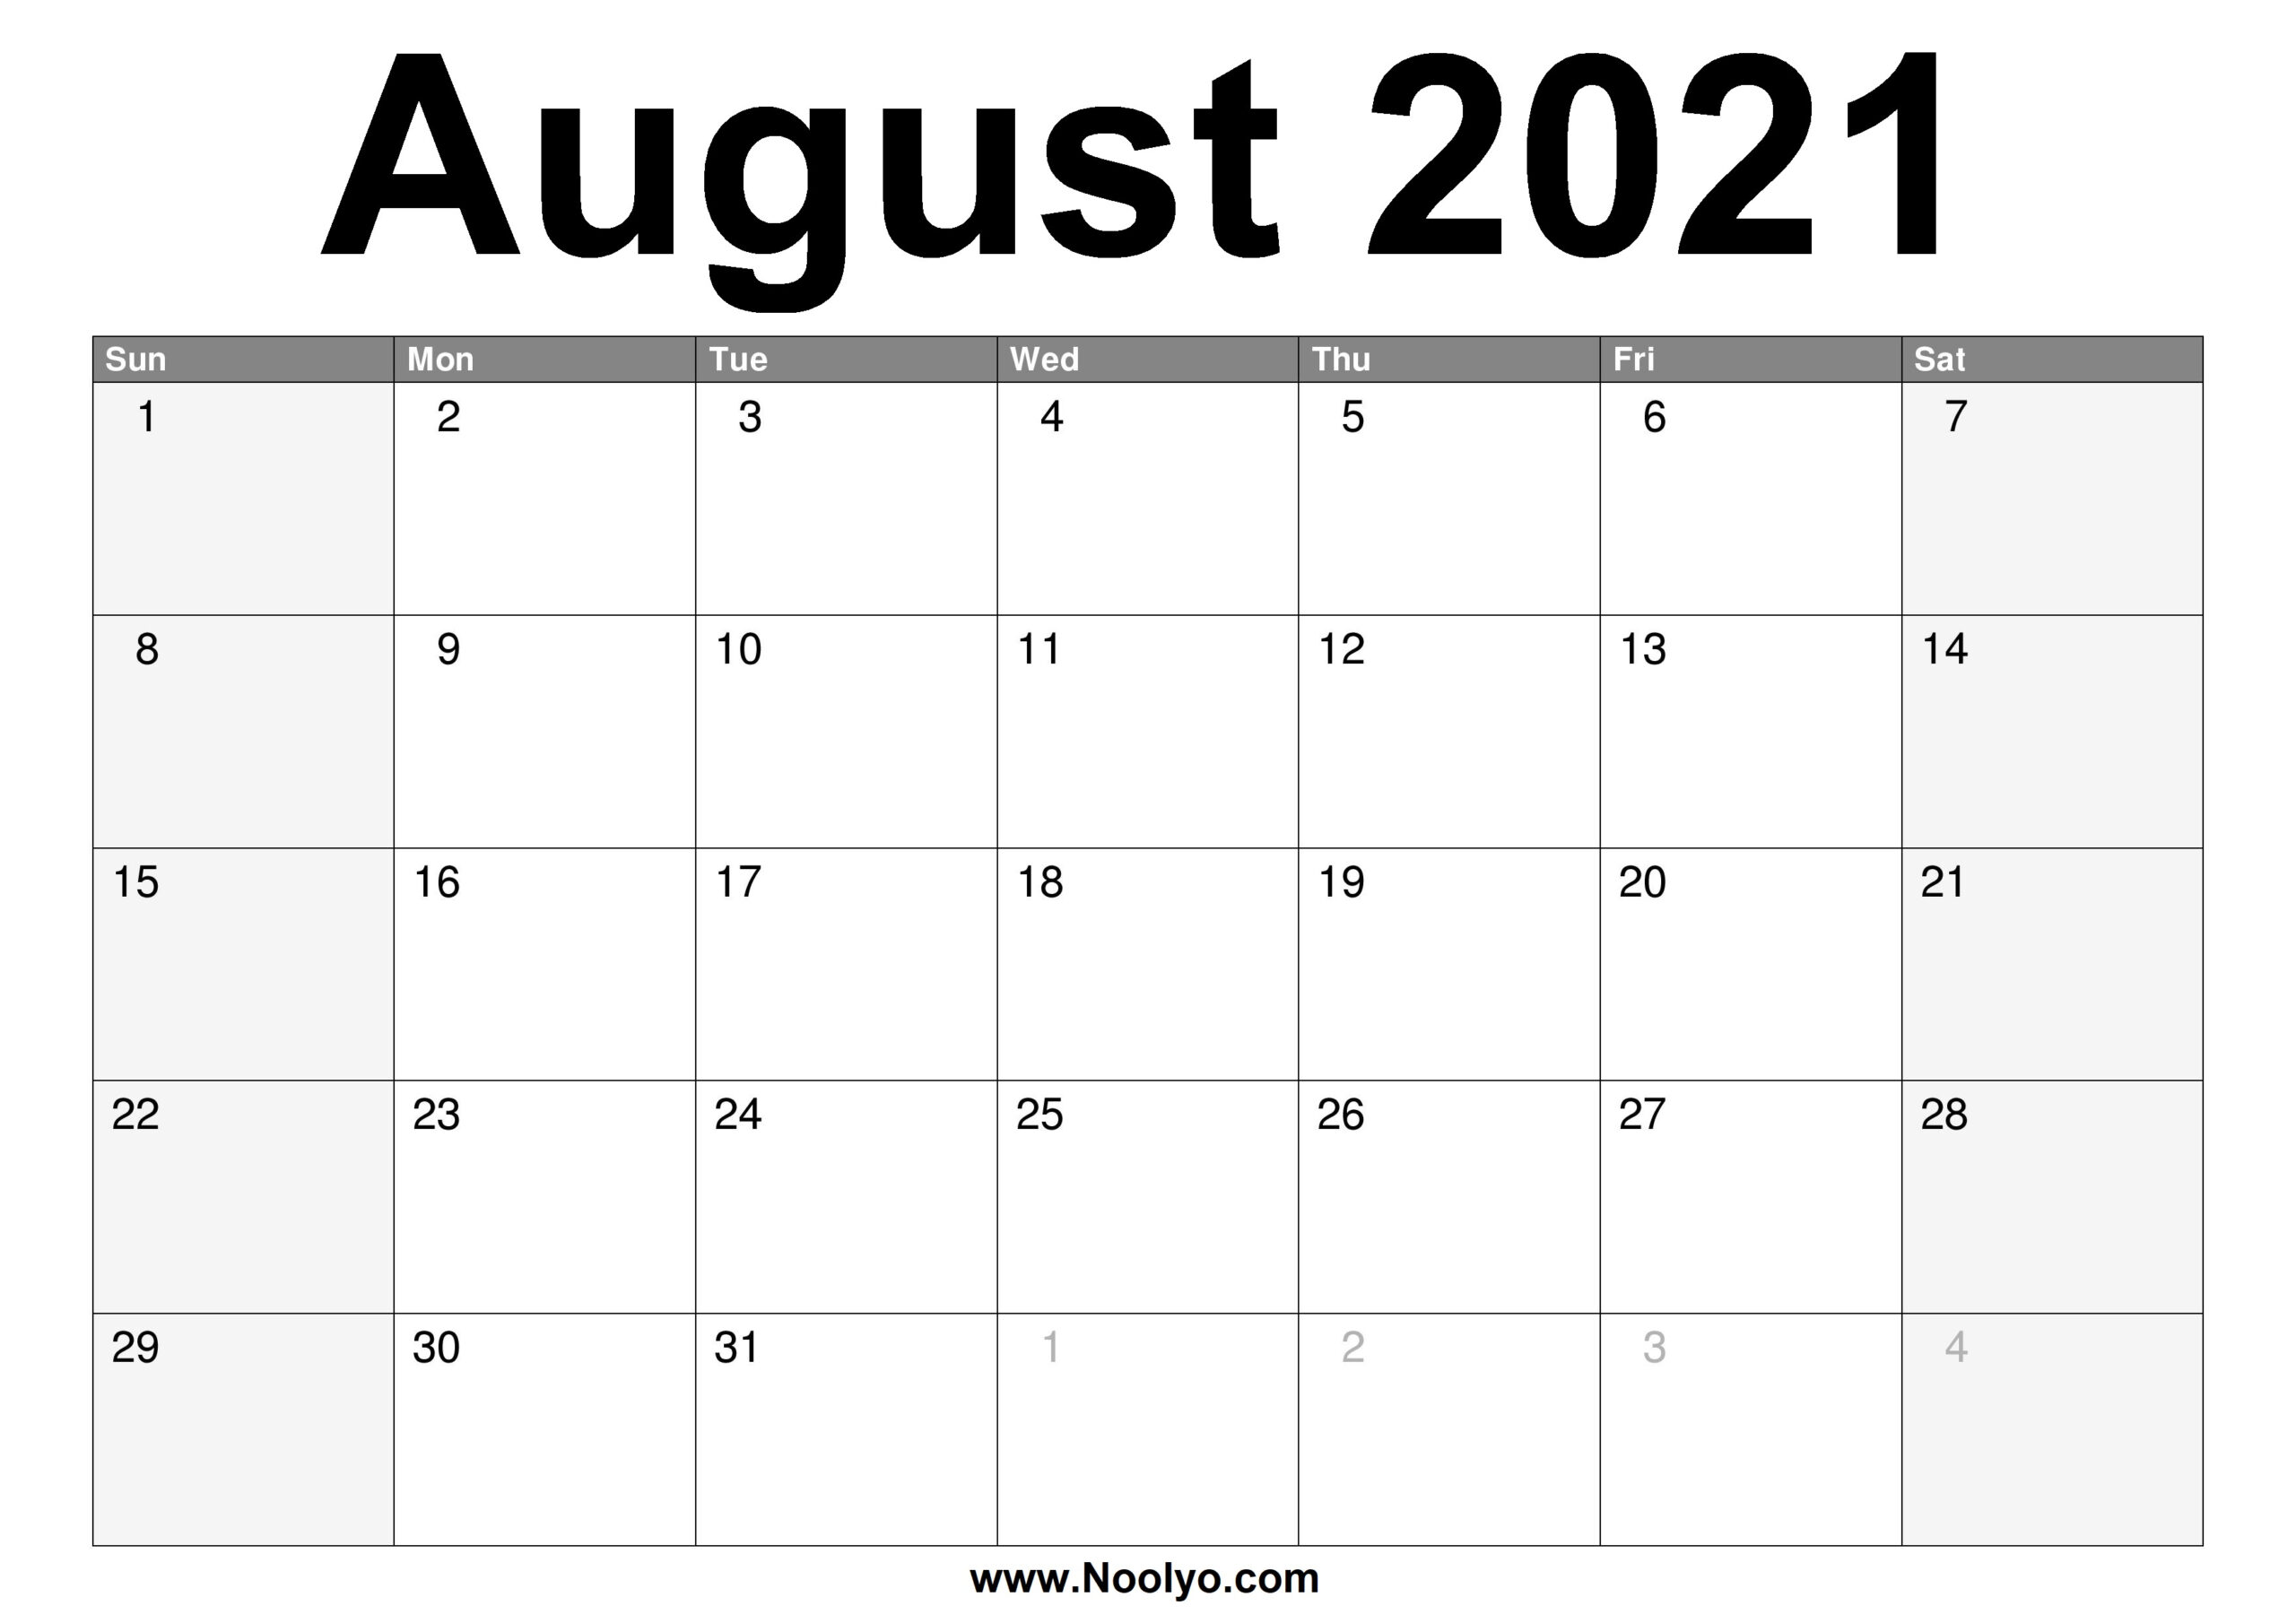 August 2021 Calendar Printable  Free Download  Noolyo for 2021 Printable Calendar By Month With Lines